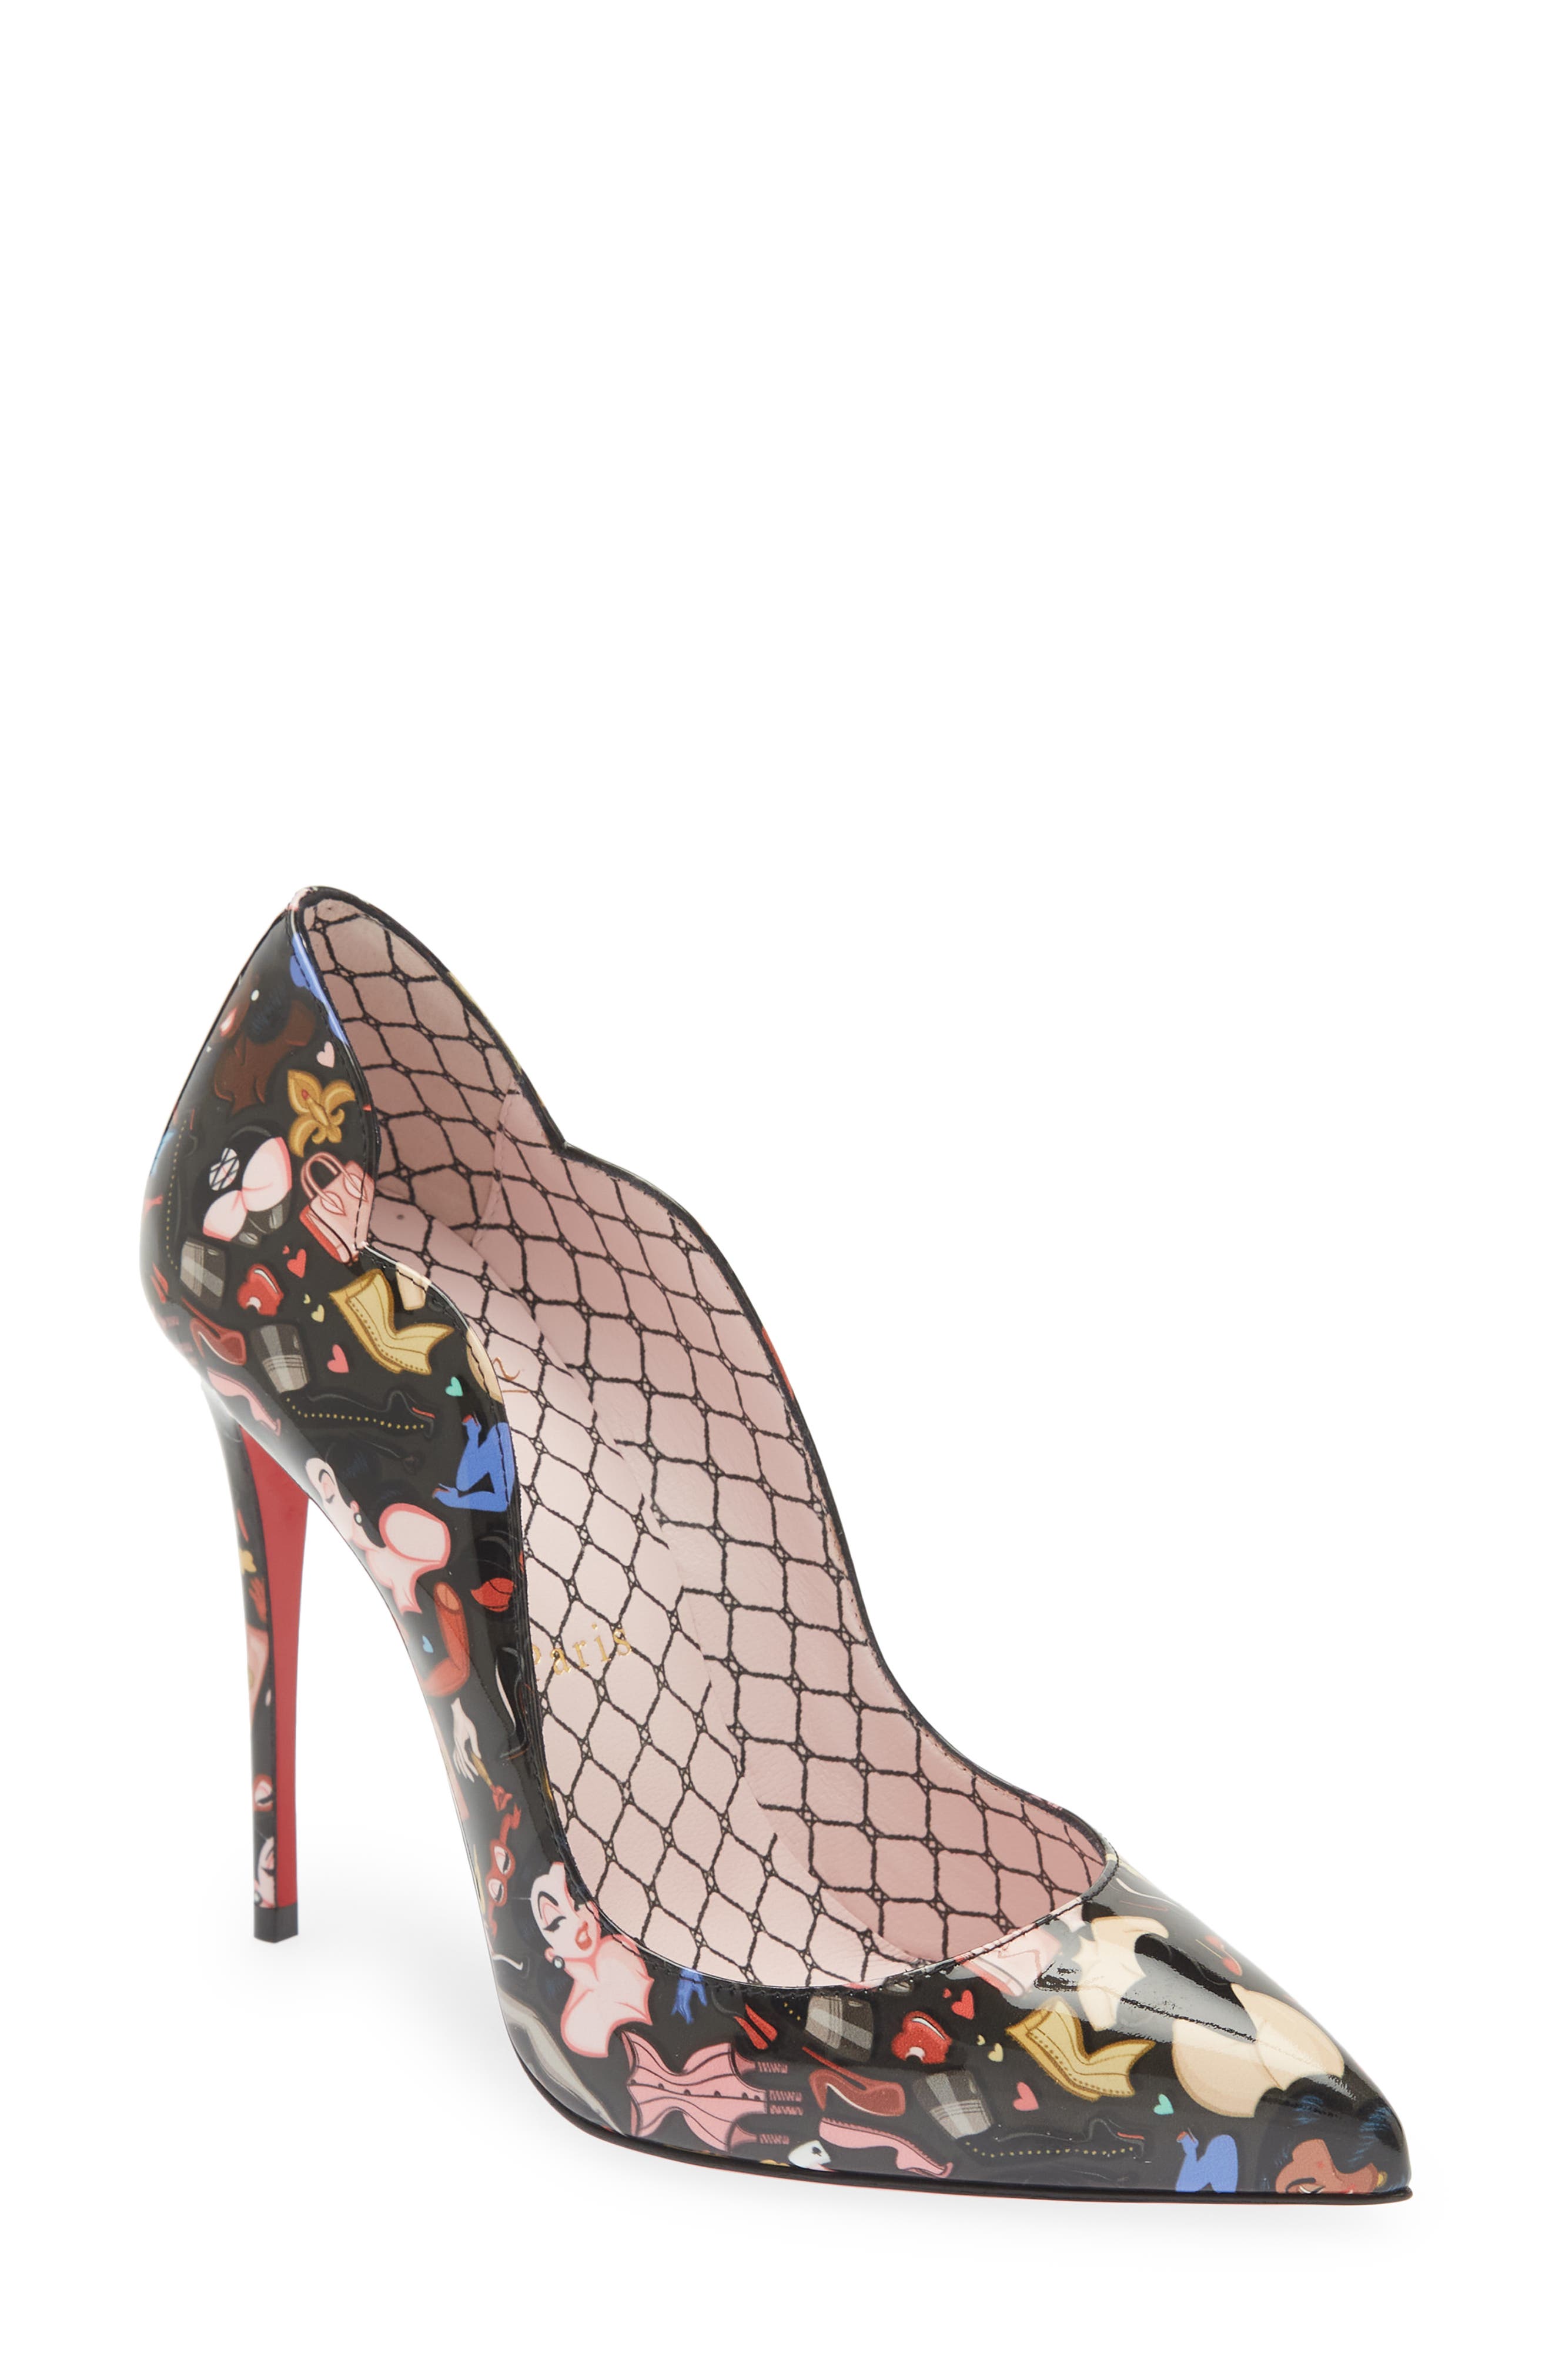 Christian Louboutin Hot Chick Pinup Print Pump in Multi